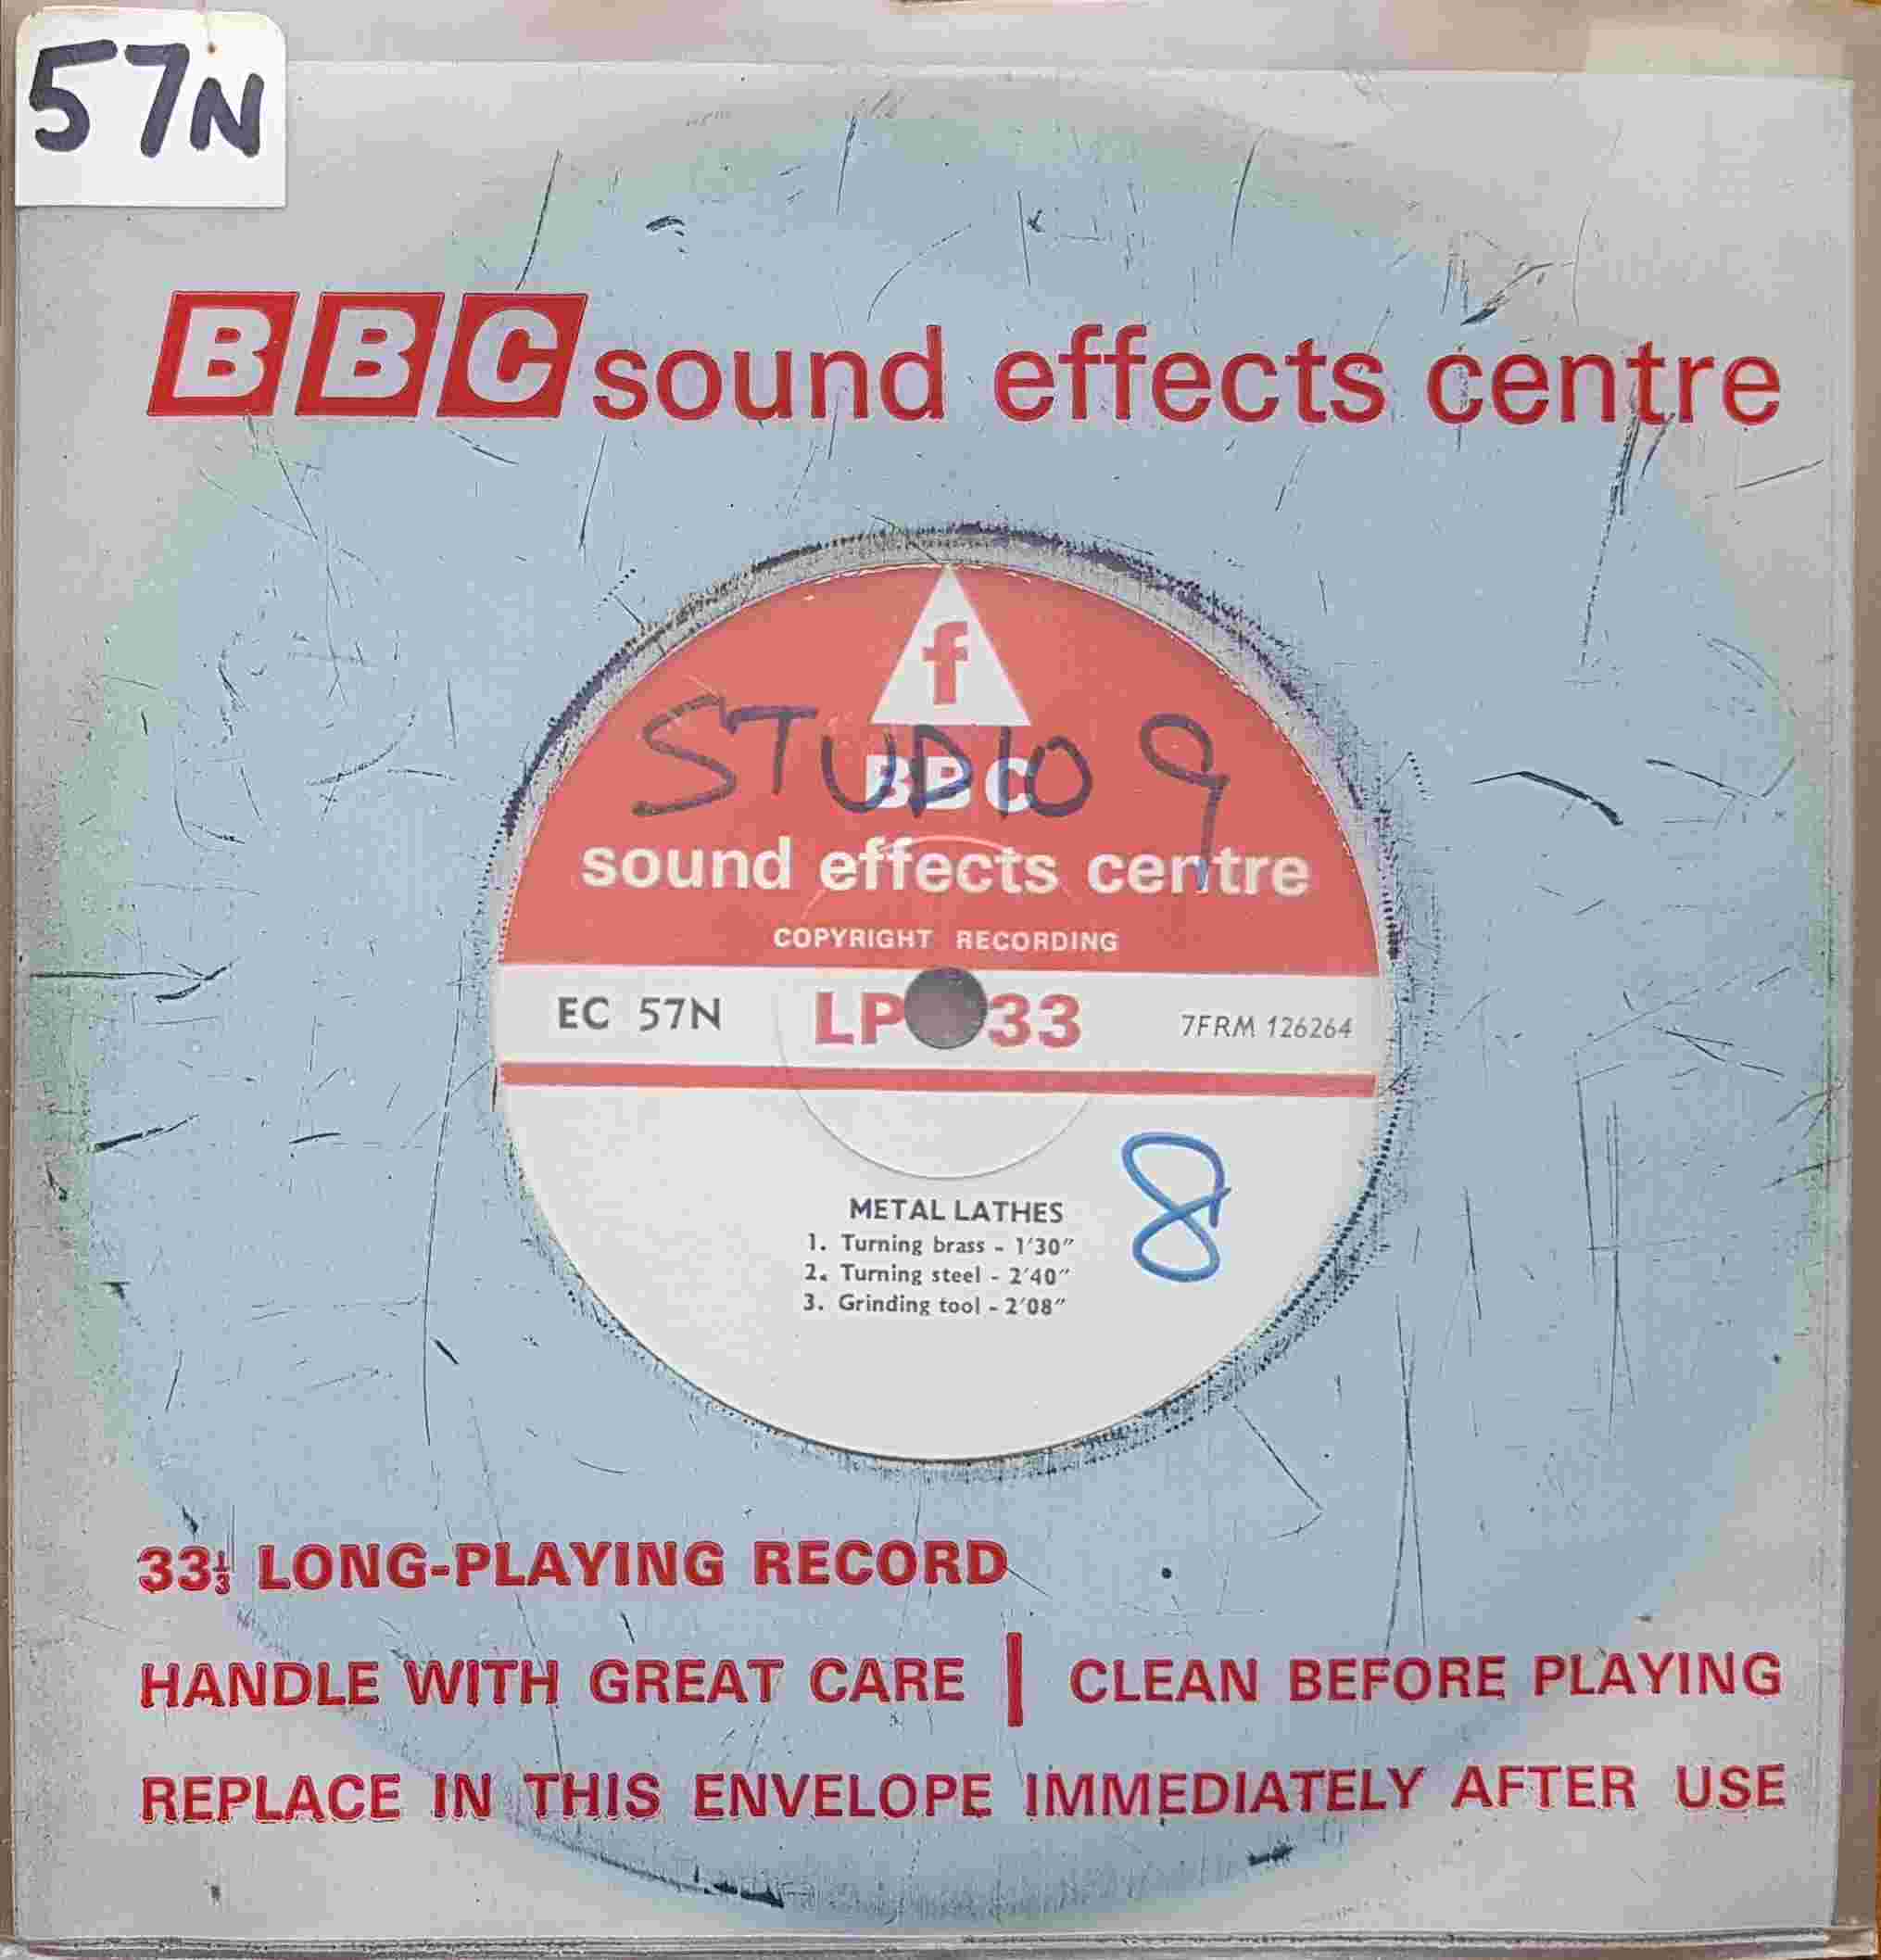 Picture of EC 57N Metal lathes by artist Not registered from the BBC singles - Records and Tapes library